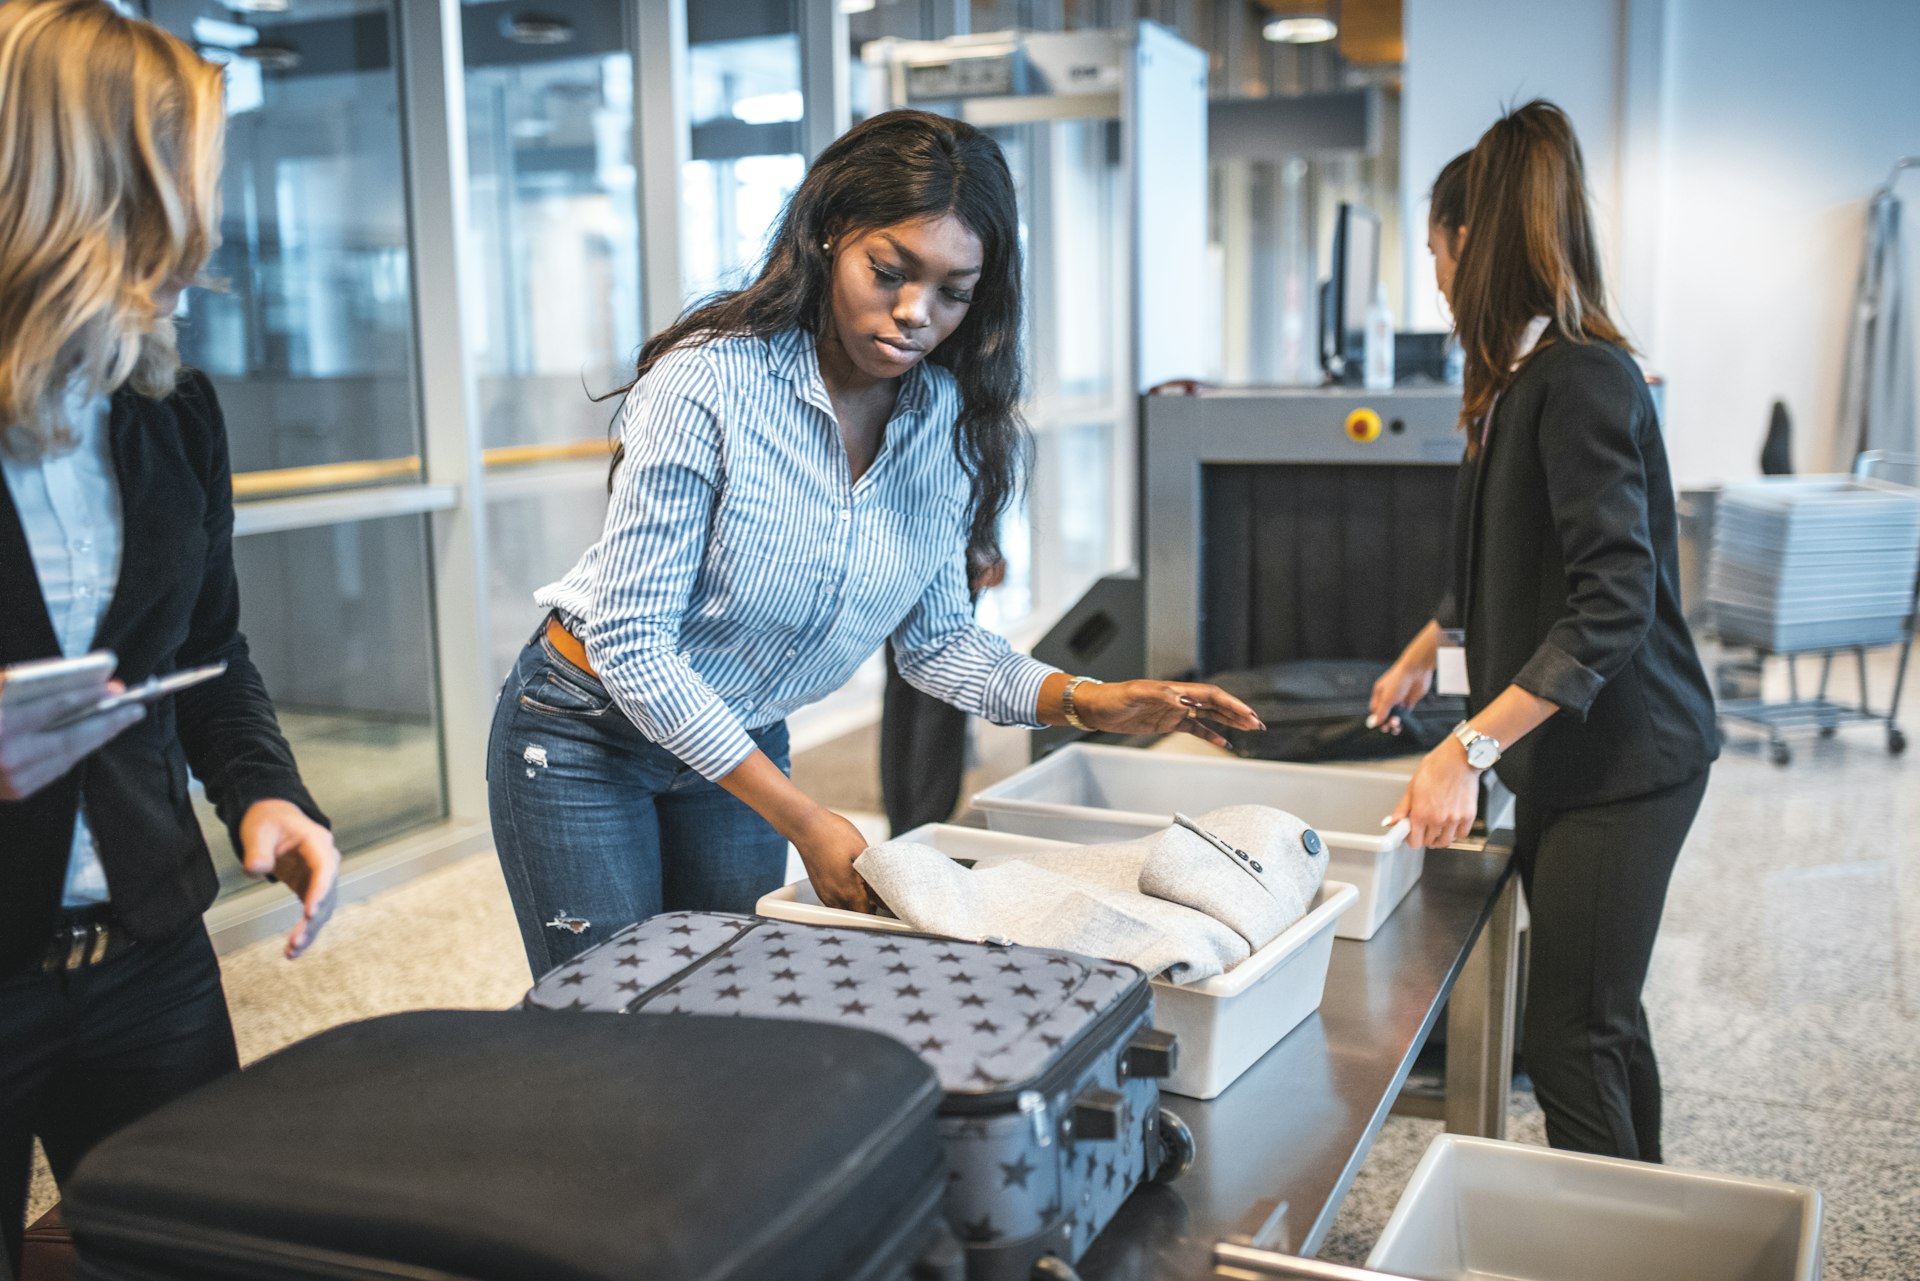 Female passengers going through security check